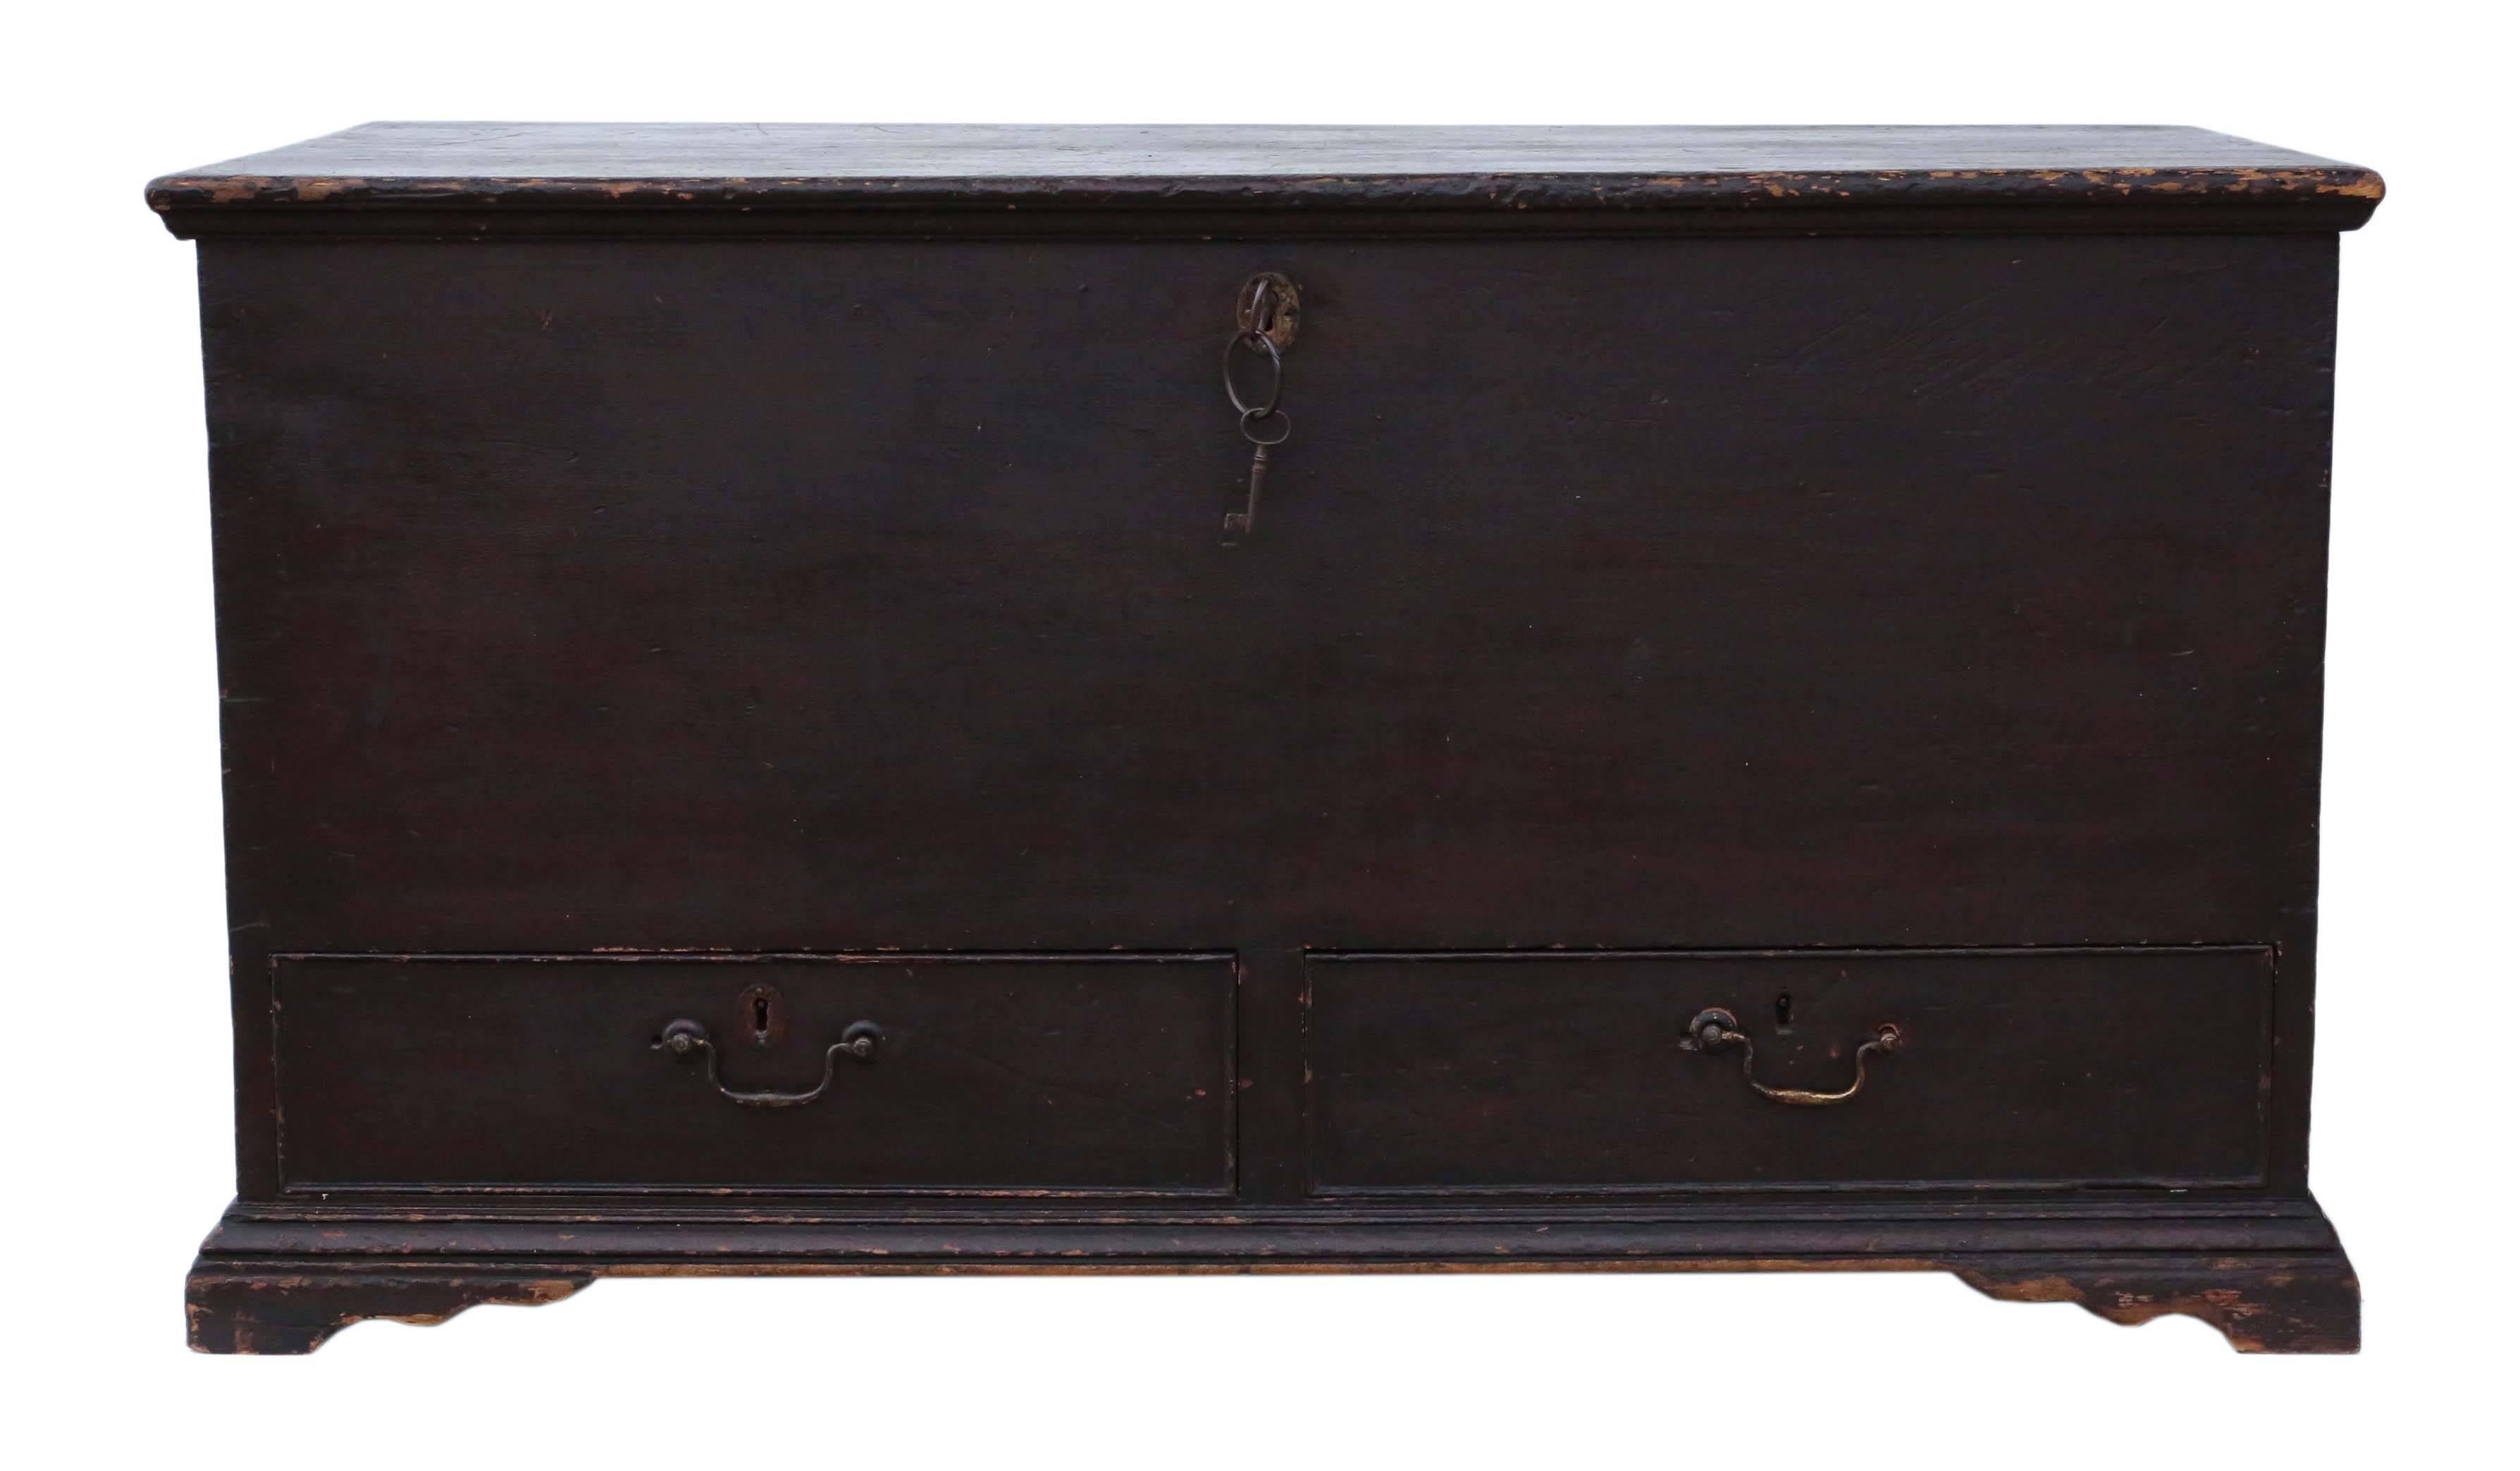 Antique circa 1800 Georgian Scumble Coffer or Mule Chest In Good Condition For Sale In Wisbech, Walton Wisbech